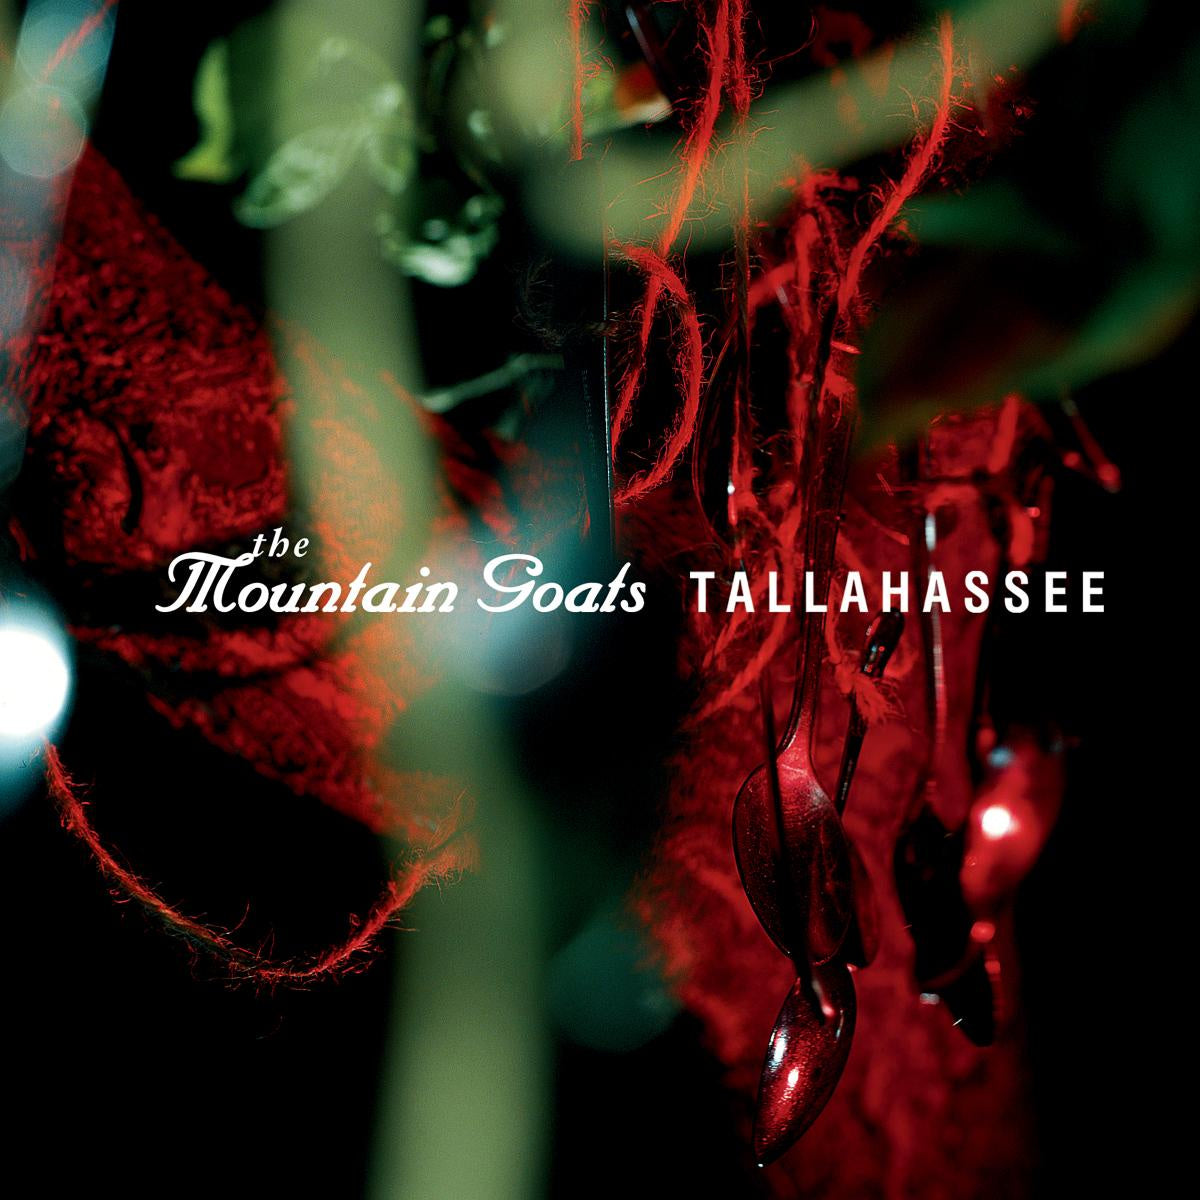 The Mountain Goats ‎– Tallahassee (2002) - New LP Record 2008 4AD Vinyl - Indie Rock / Folk